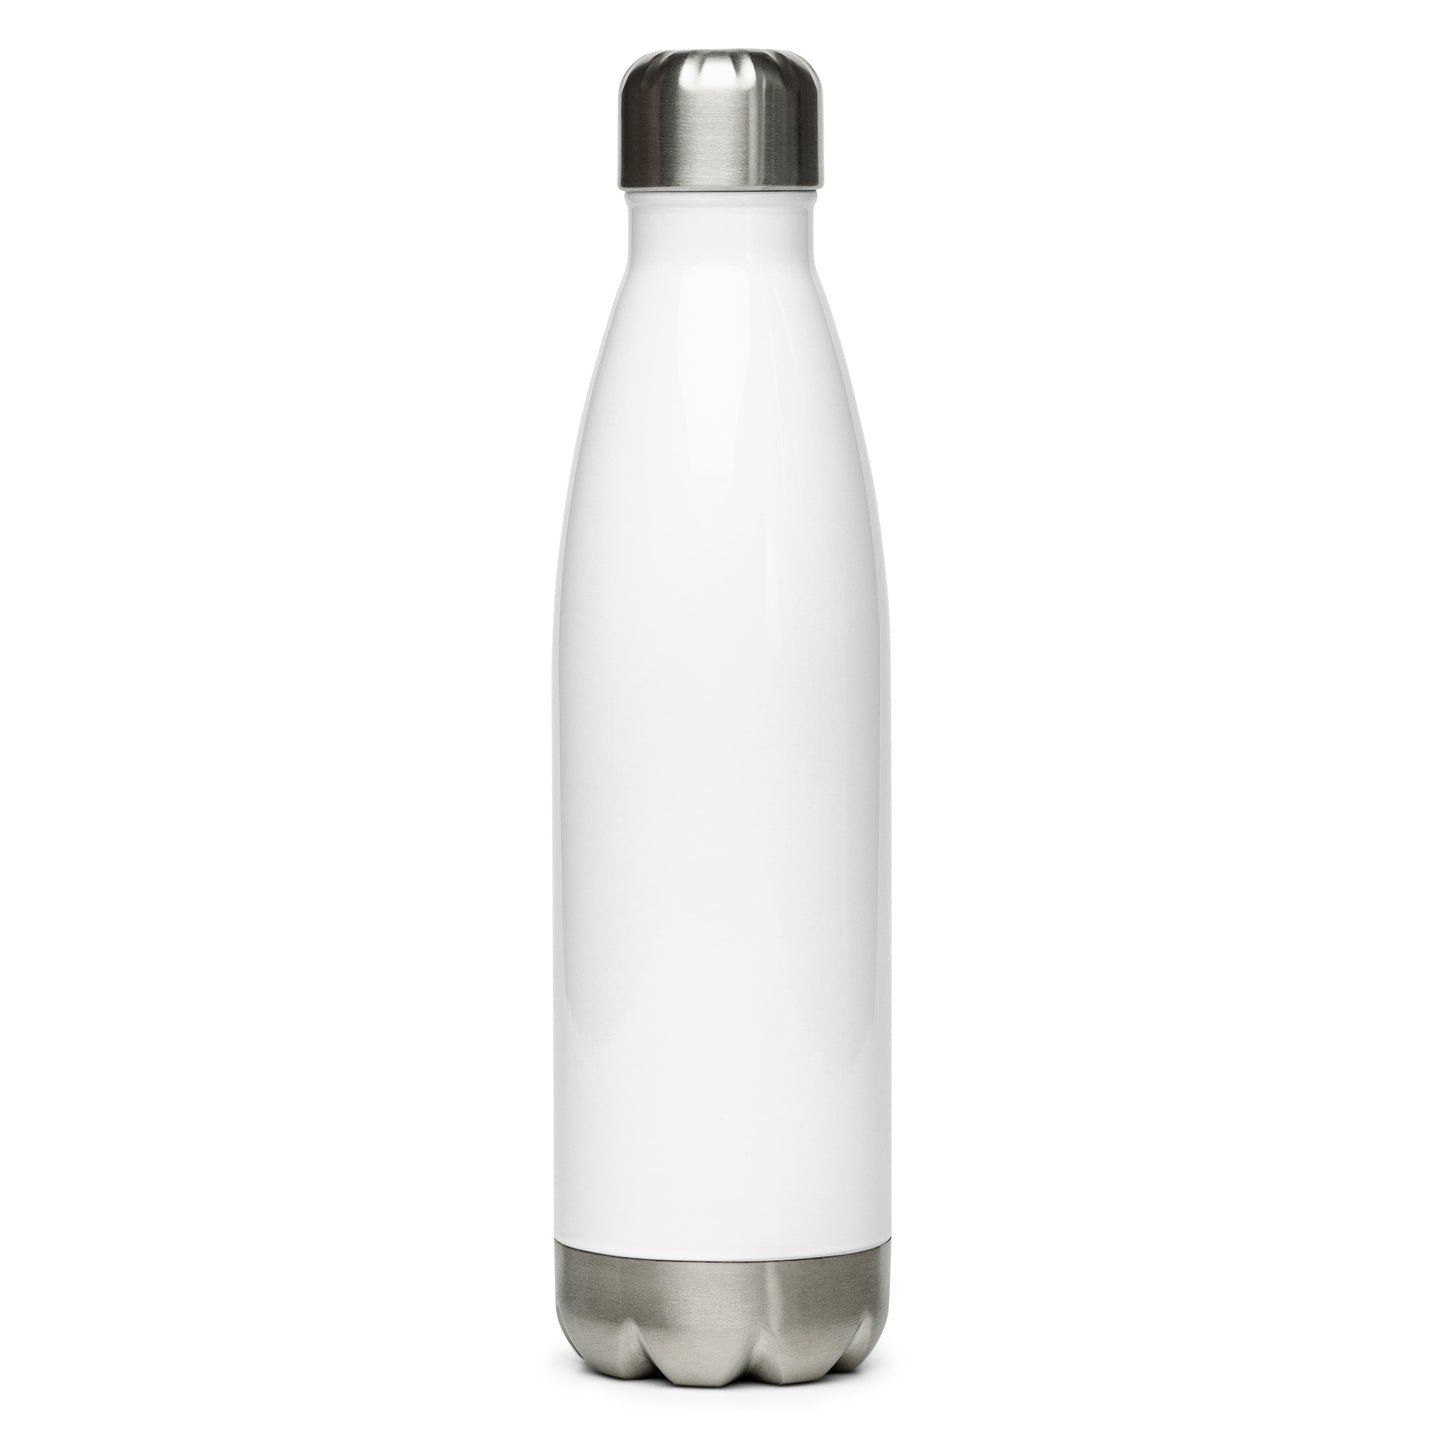 Stainless Steel Water Bottle - Kindness is the new sexy